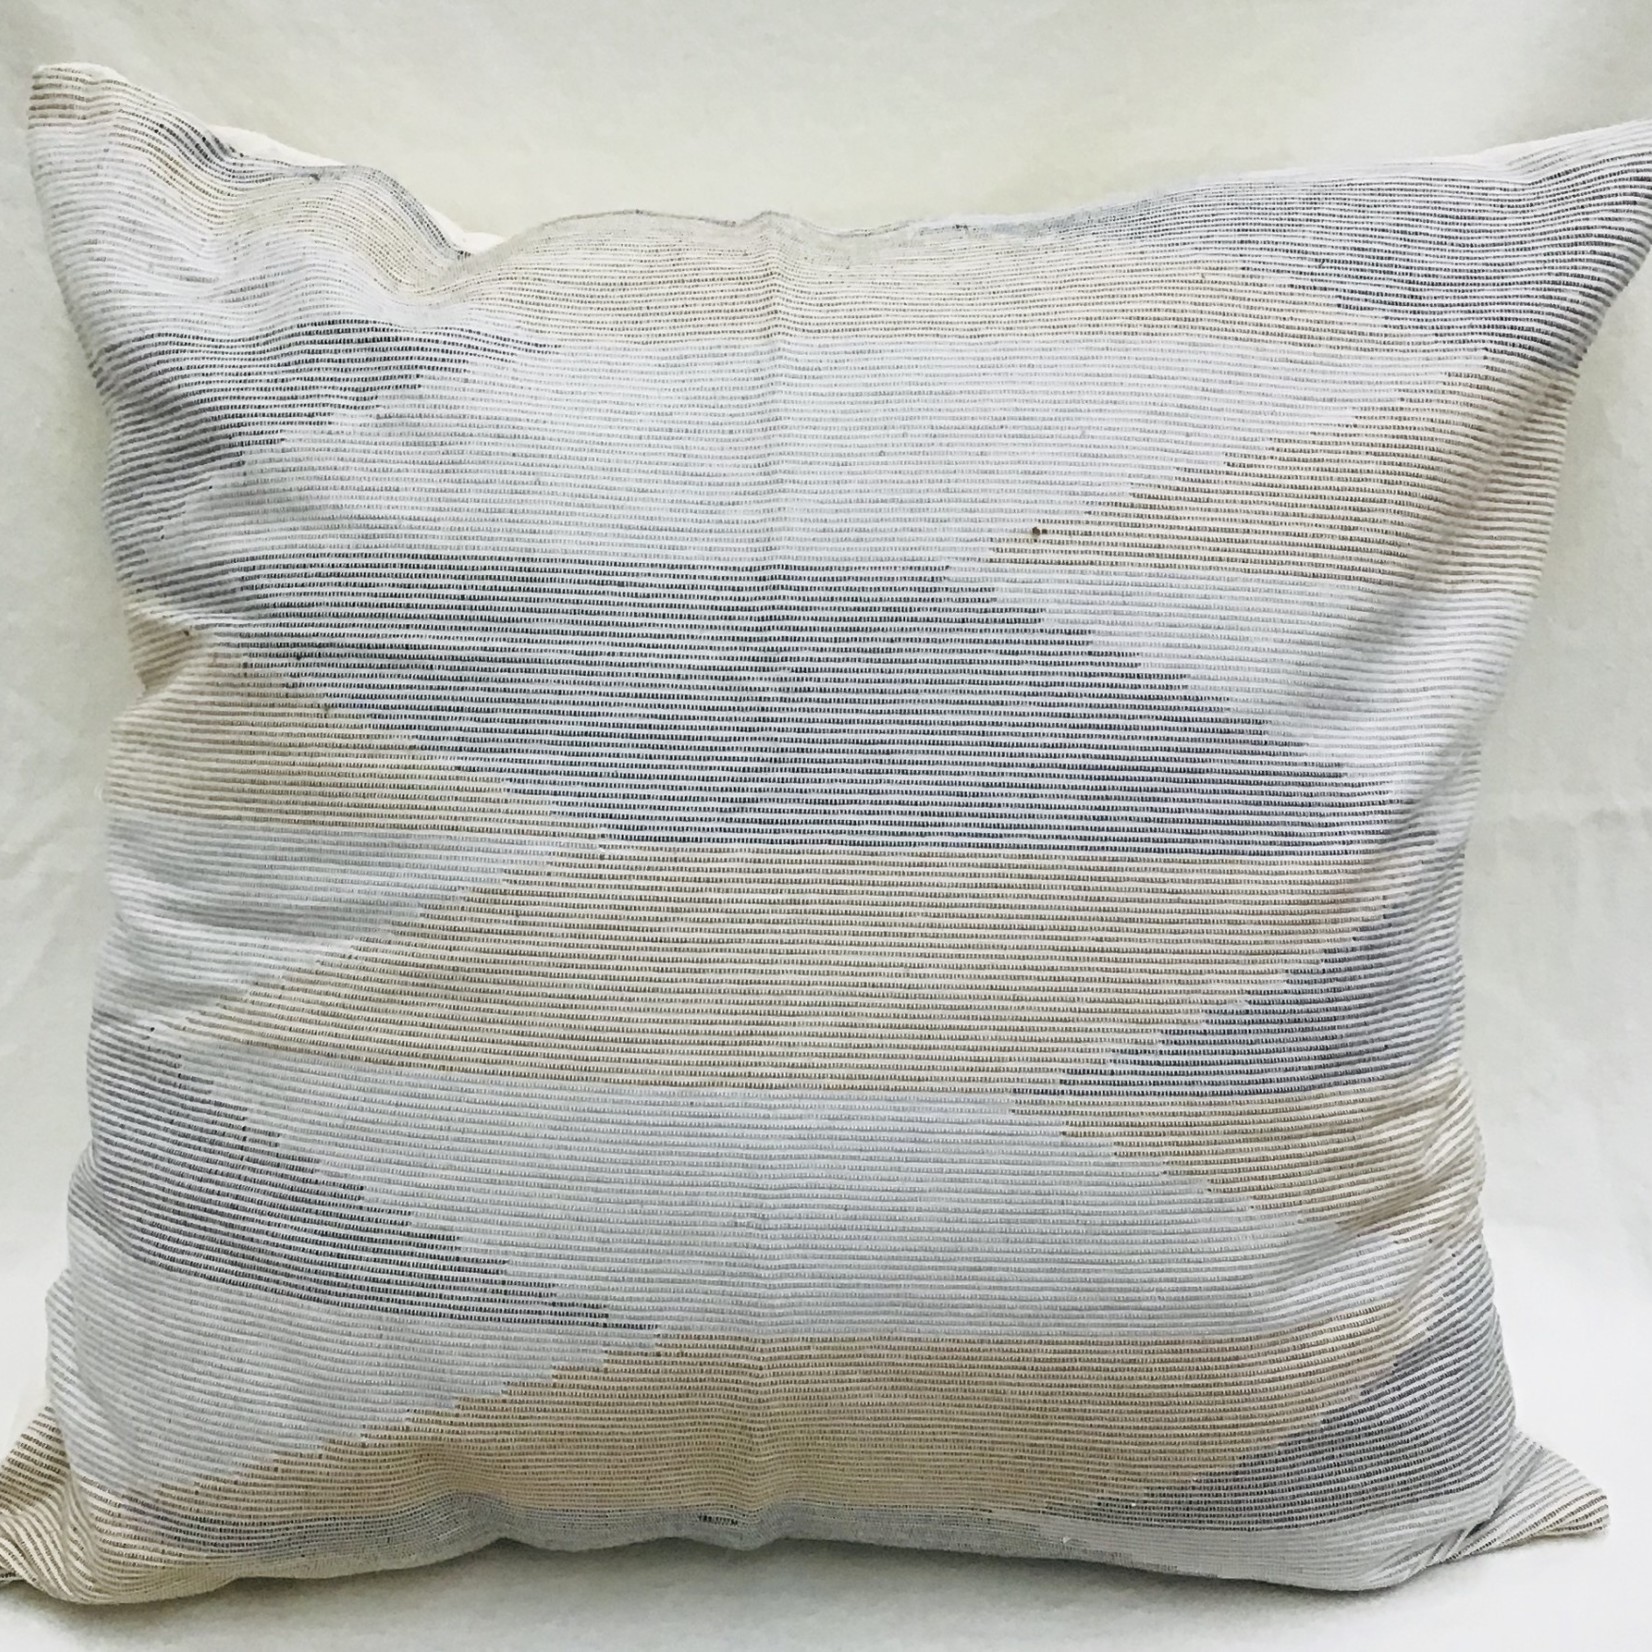 Ten Thousand Villages Chevron Stitched Cushion Cover - Blue & Taupe, India